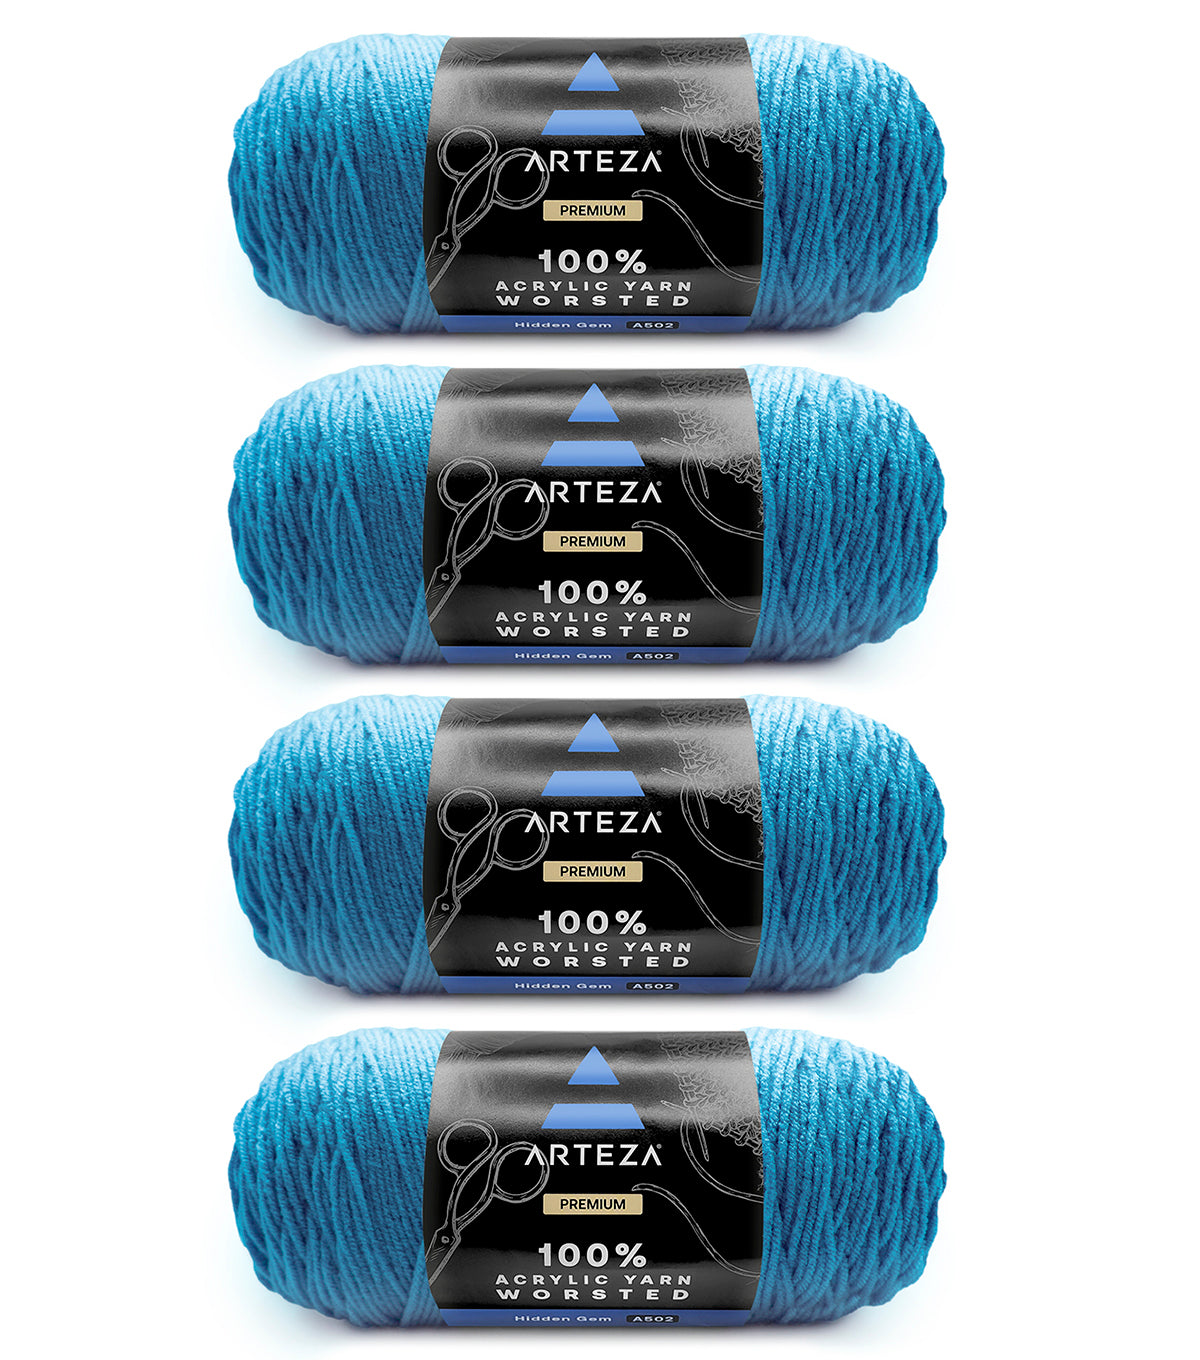 Craftwiz 100% Acrylic Yarn for Crocheting and Knitting - 30x30g Skeins of #4 Worsted Weight Yarn, 1600 Yards of Soft Crochet Yarn, Perfect for